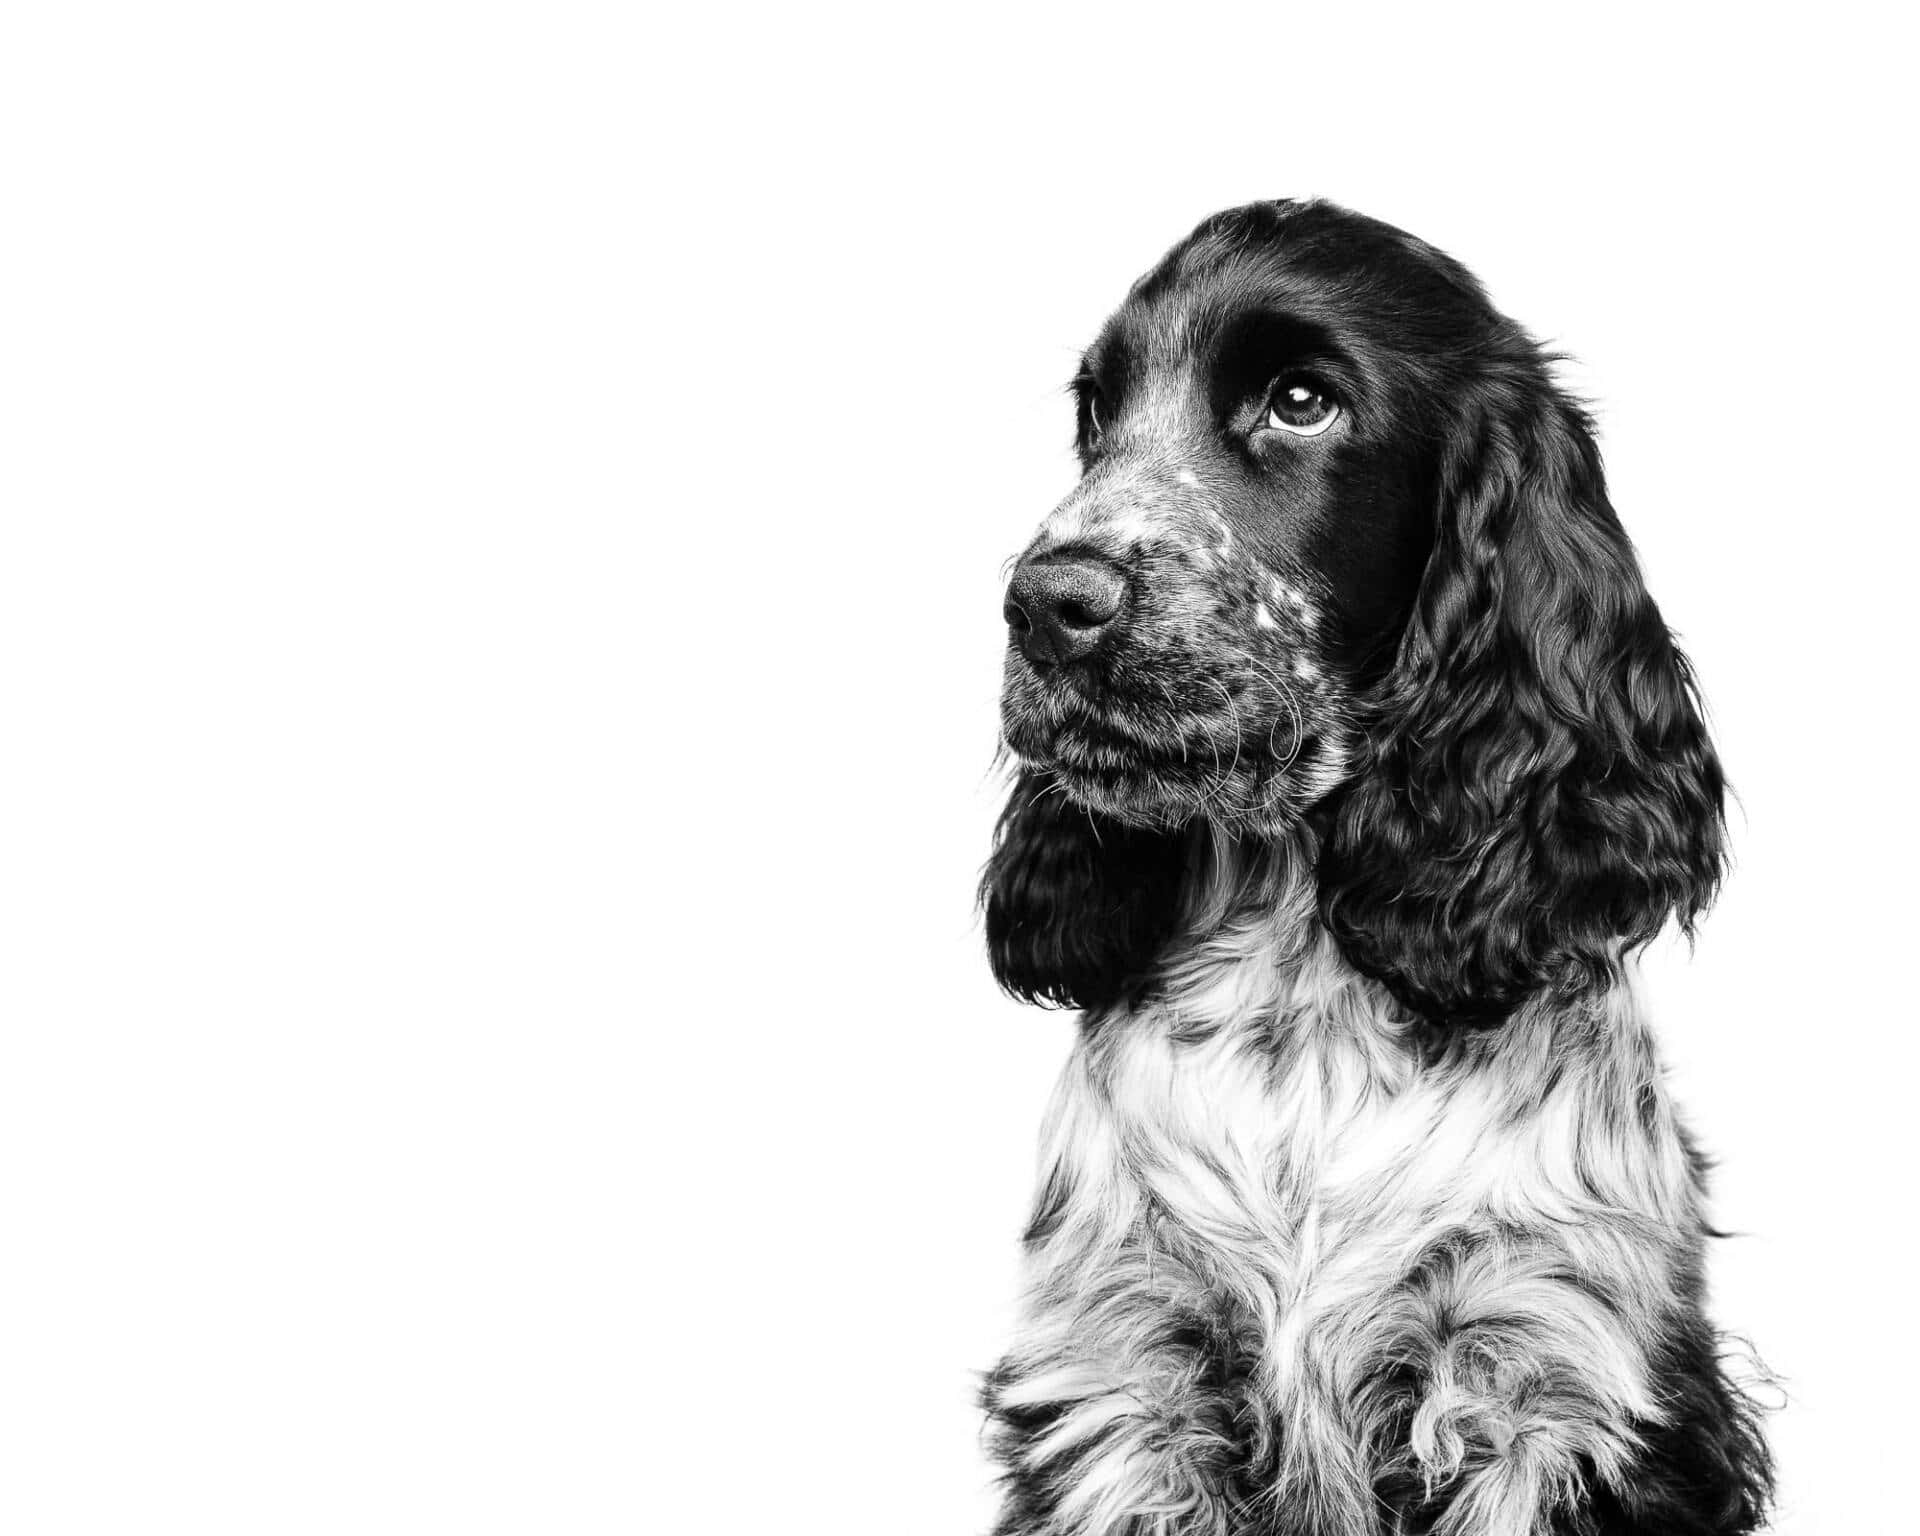 Cocker Spaniel Puppy Dog Studio Portrait by Mark Hewitson of Mark Hewitson Photography, Thame, Oxfordshire